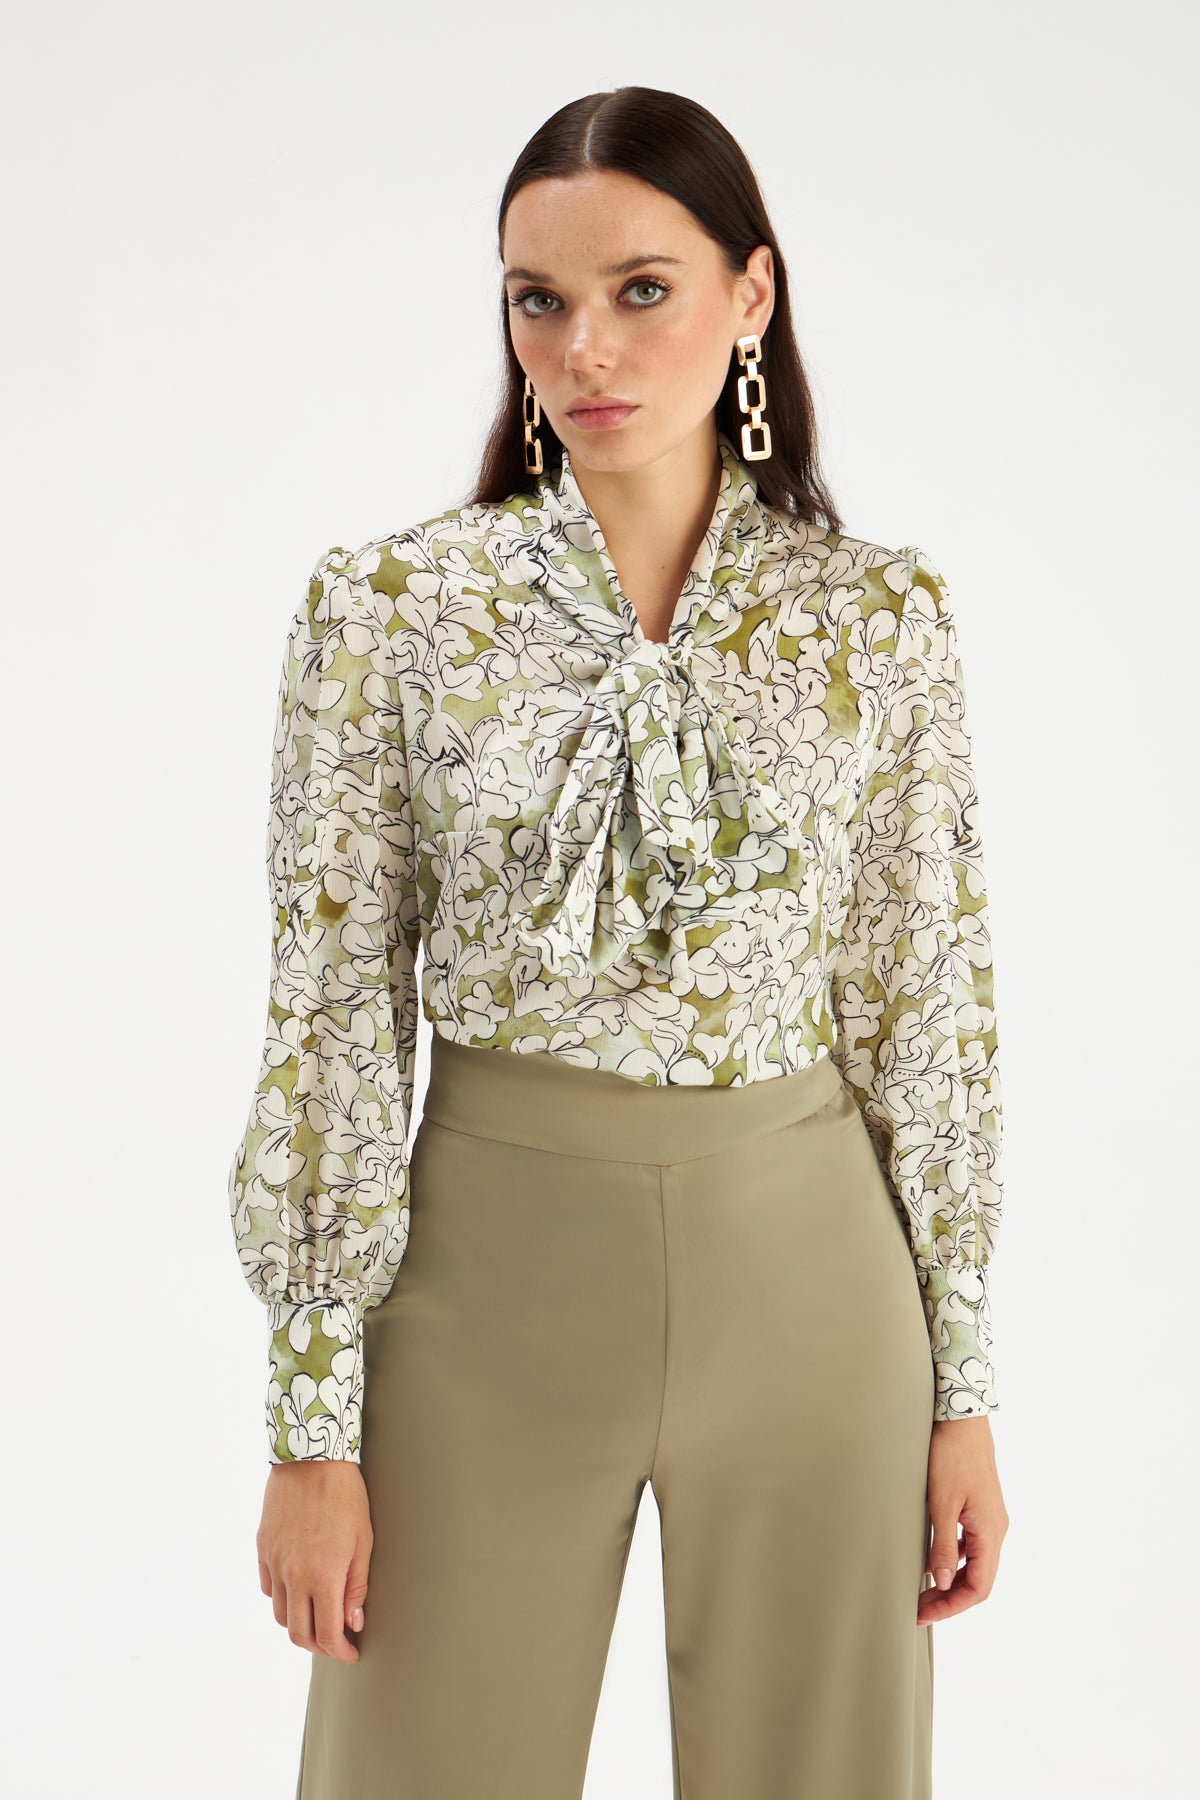 Tie Collar Patterned Blouse - GREEN